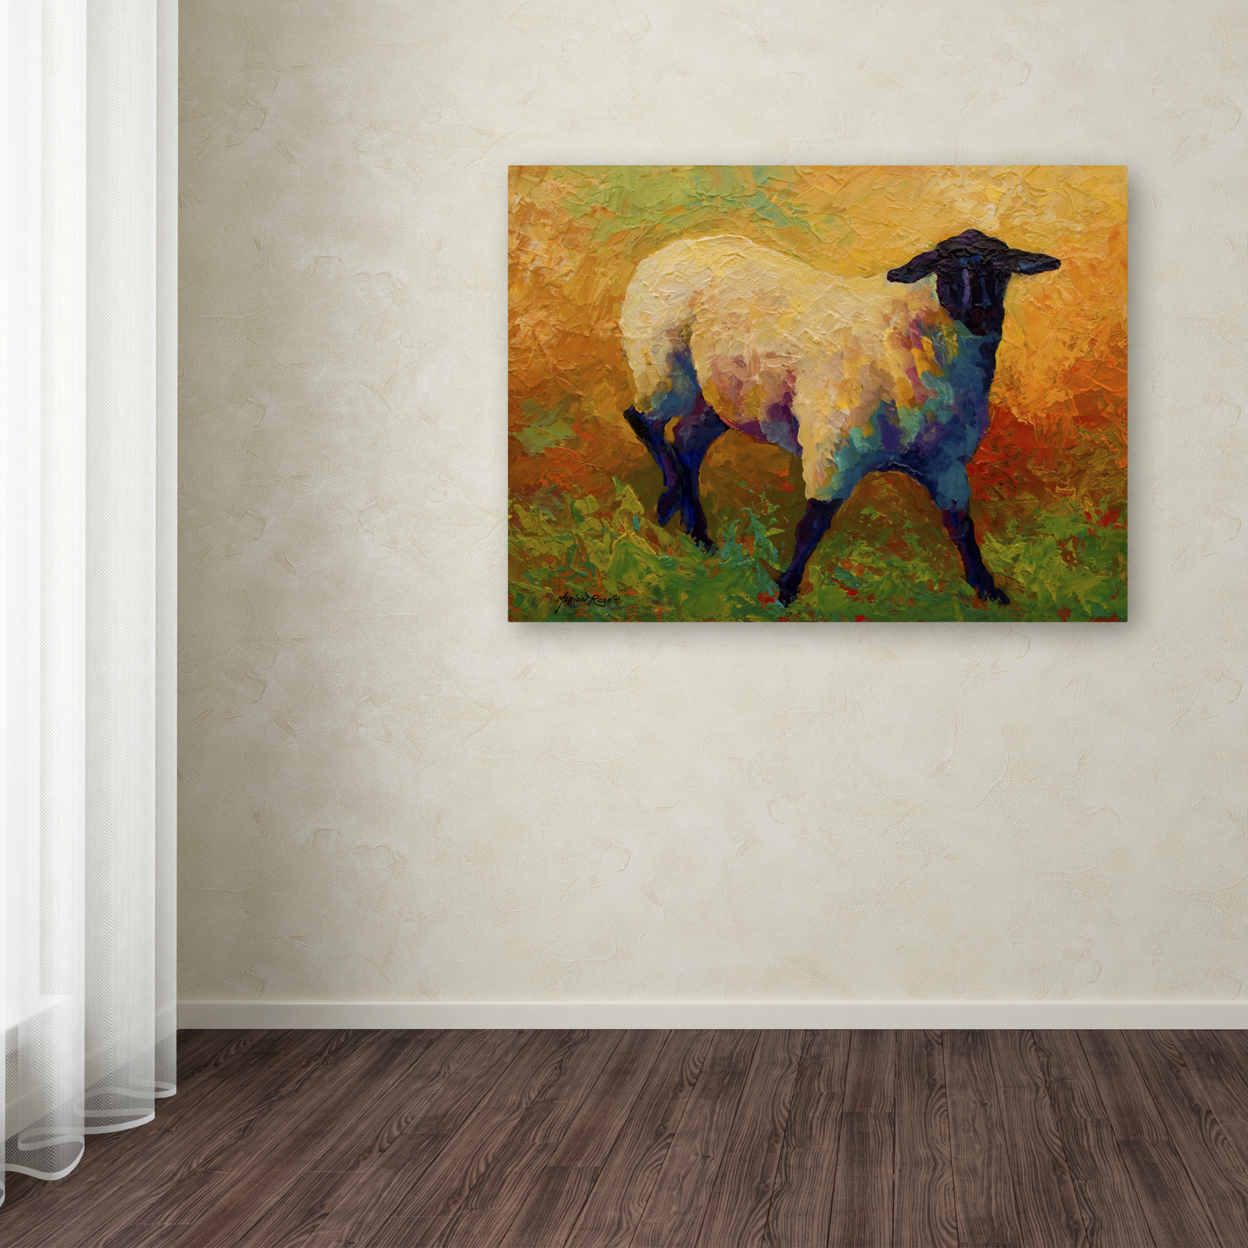 Marion Rose 'Ewe Portrait IV' Ready To Hang Canvas Art 24 X 32 Inches Made In USA